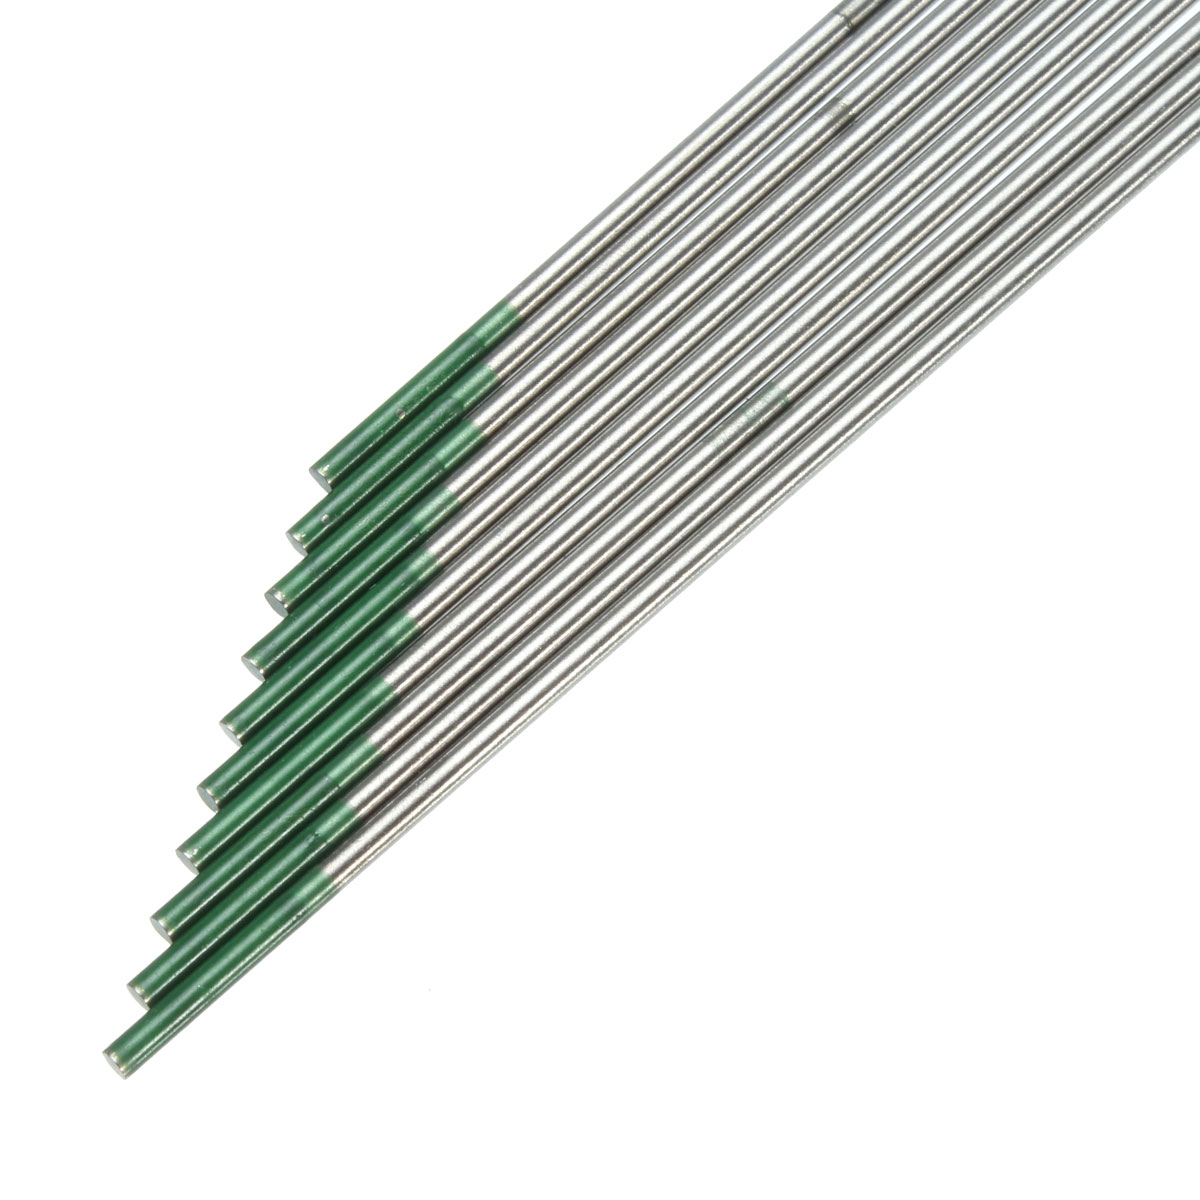 Green-Tip-Pure-Tungsten-Electrode-for-TIG-Welding-10PK--16mm-X-150mm-1056180-3